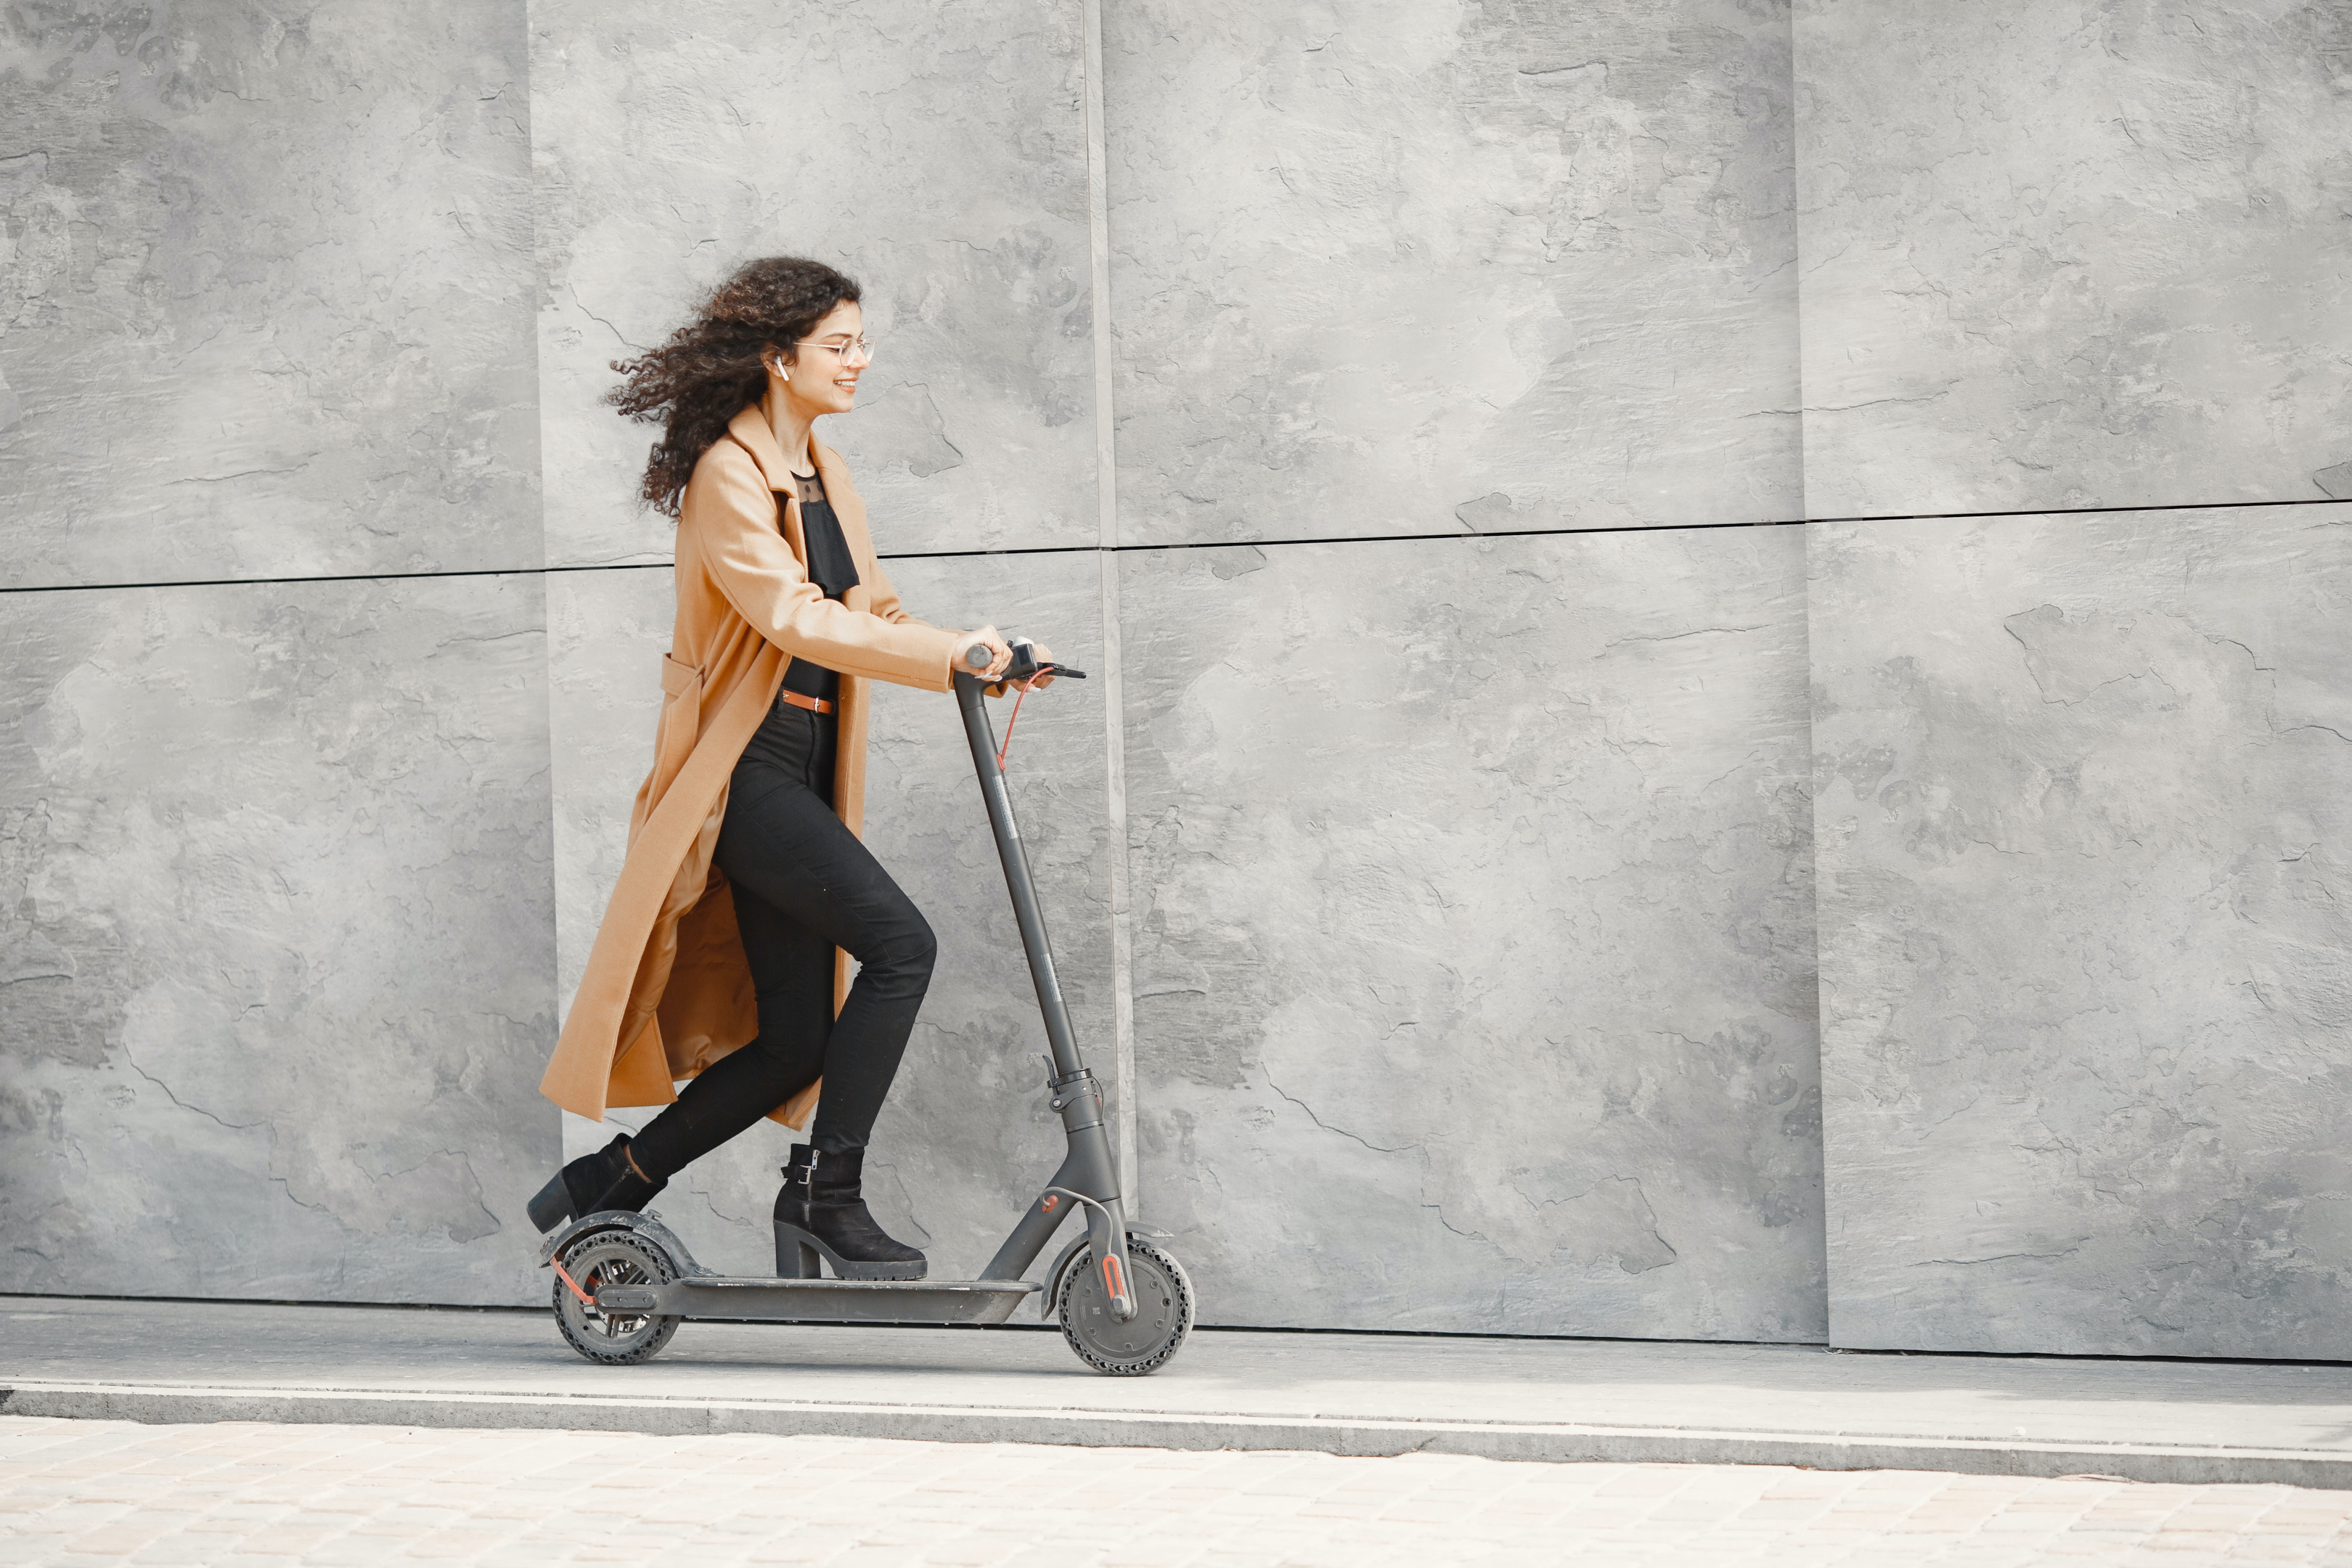 Top Speed and Range: Understanding the Limits of Electric Scooters